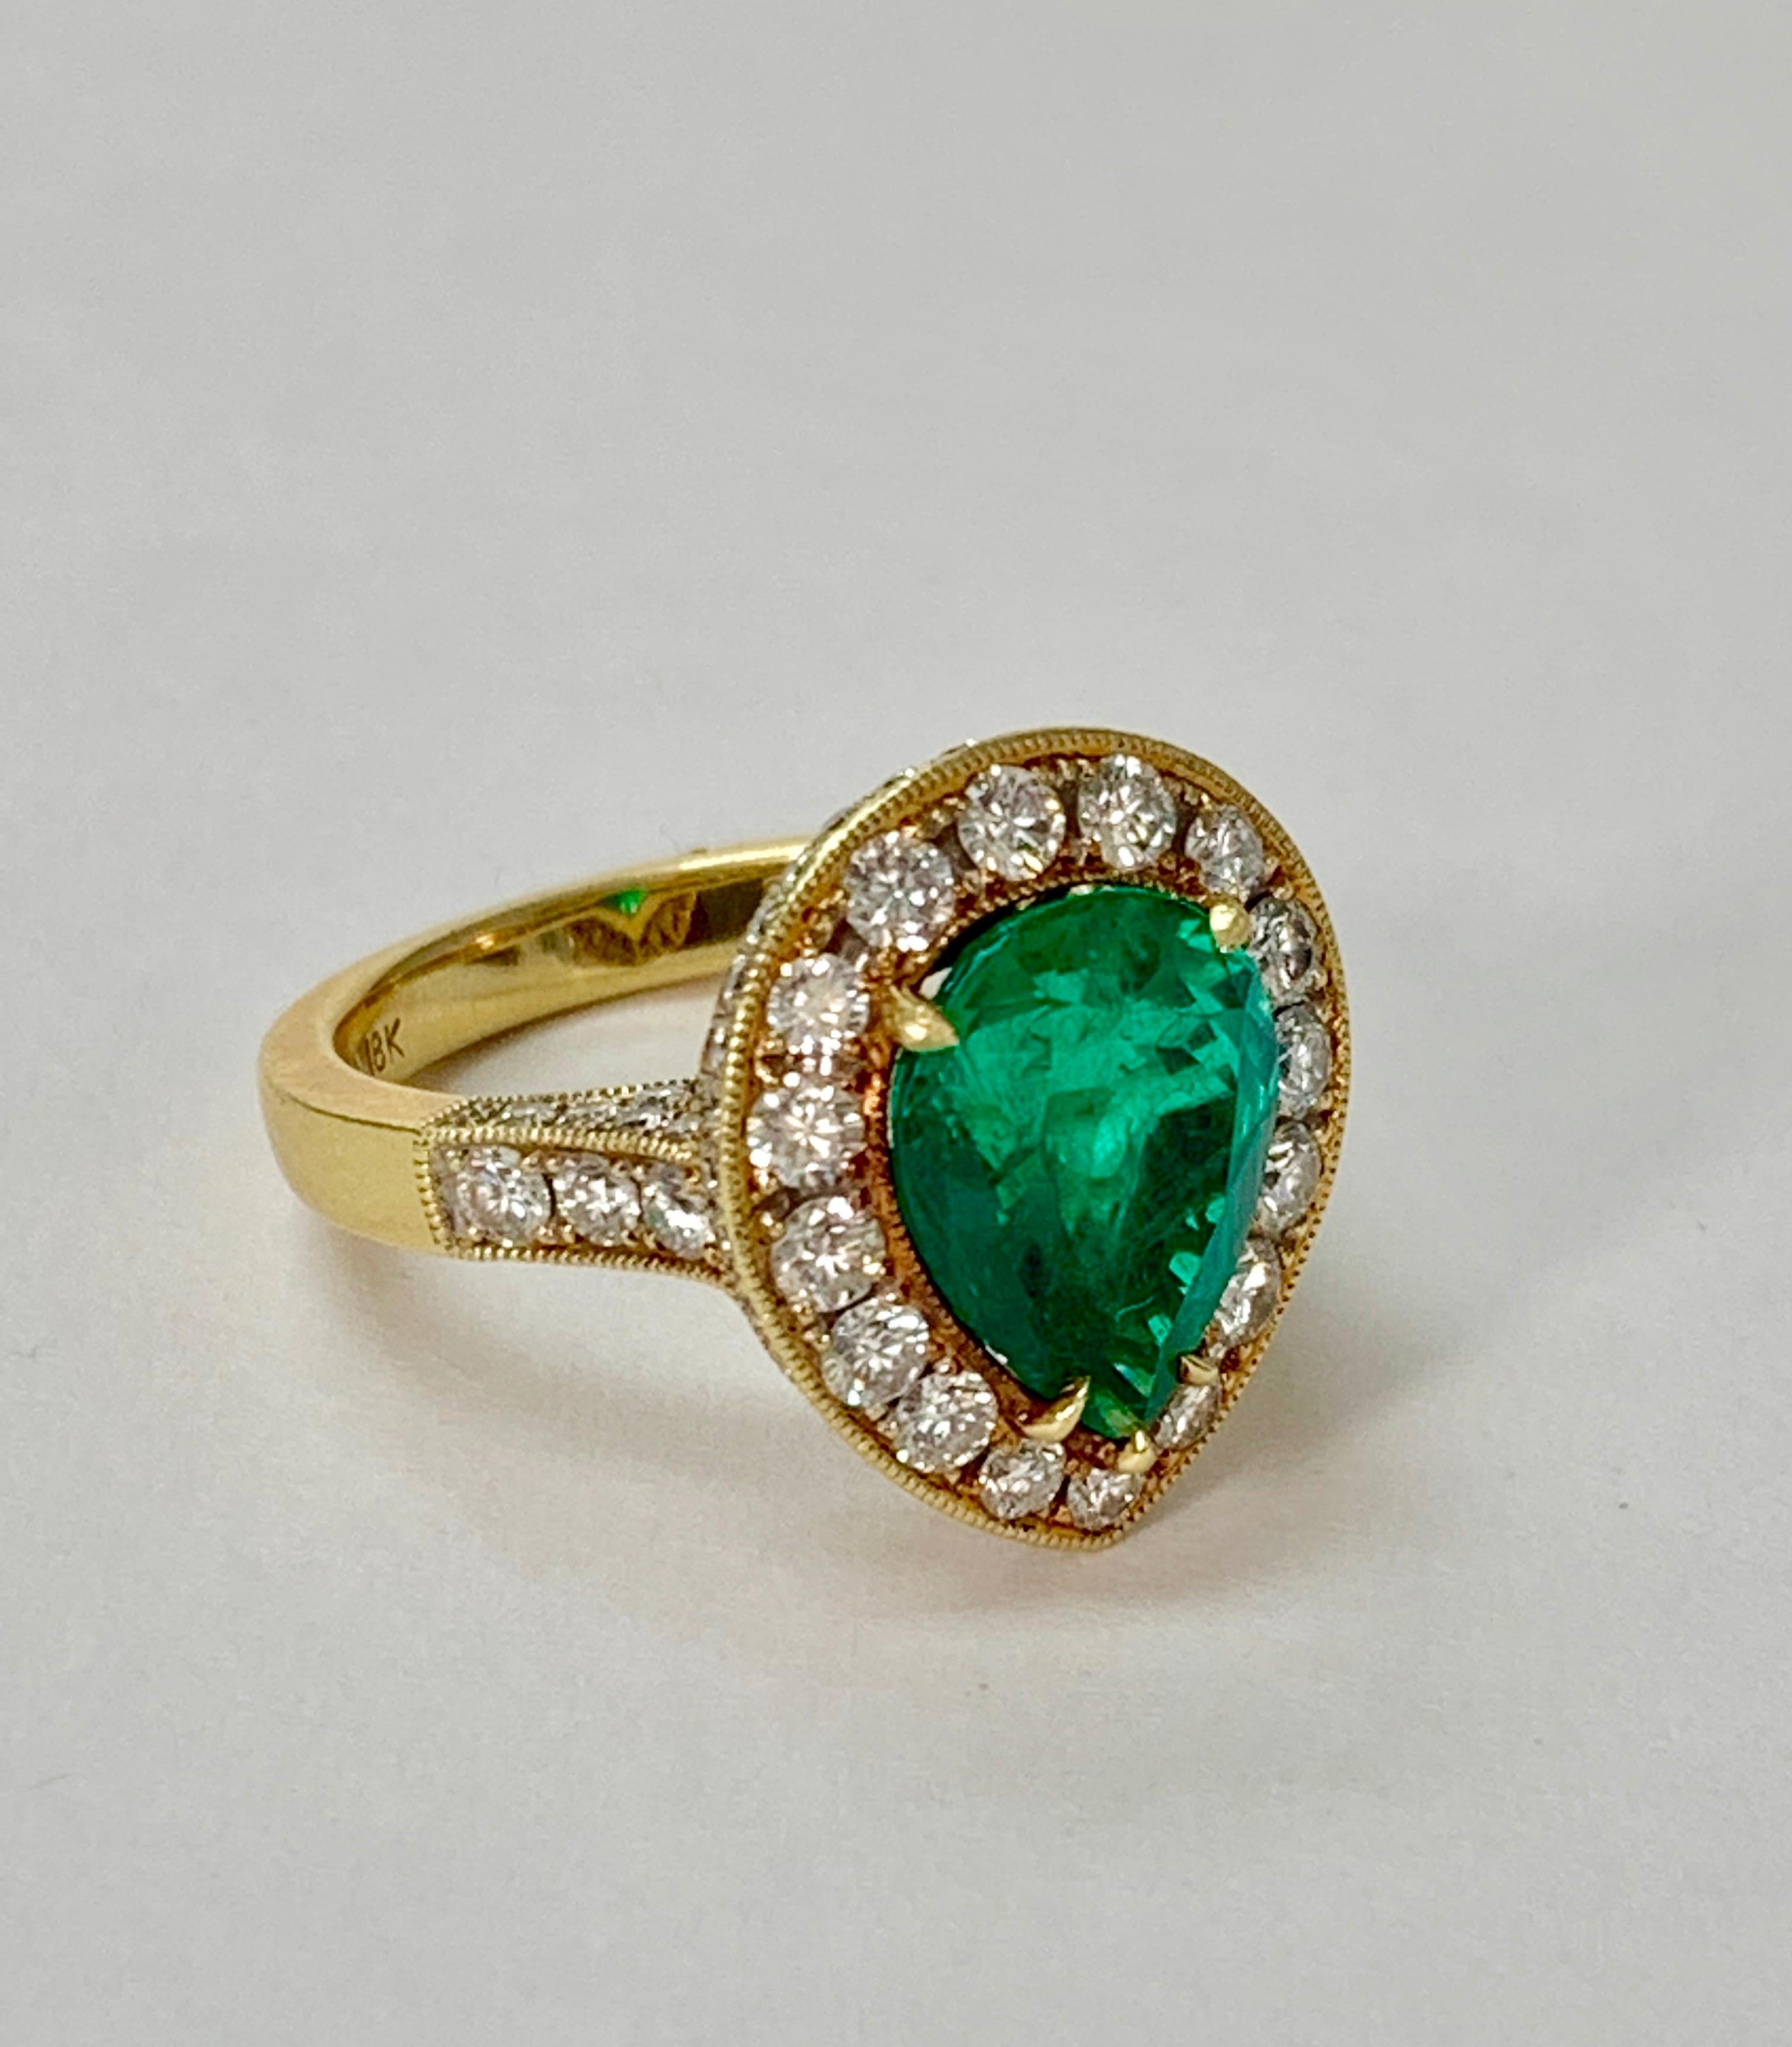 Contemporary 3.25 Carat Emerald and Diamond Engagement Ring in 18K Yellow Gold